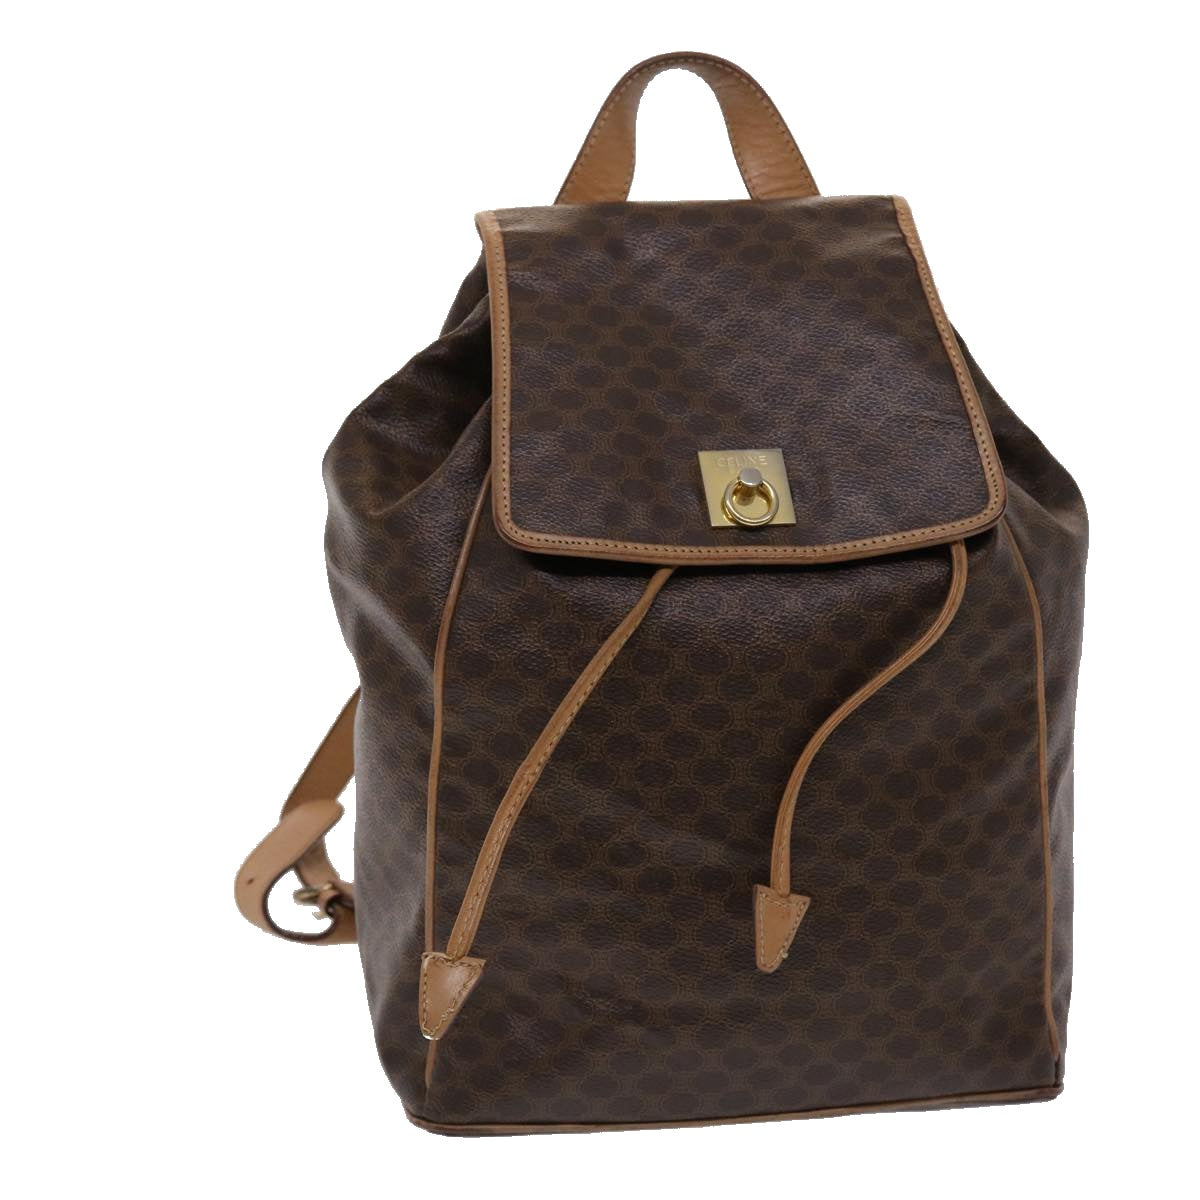 CELINE Macadam Canvas Backpack PVC Leather Brown Auth bs6391